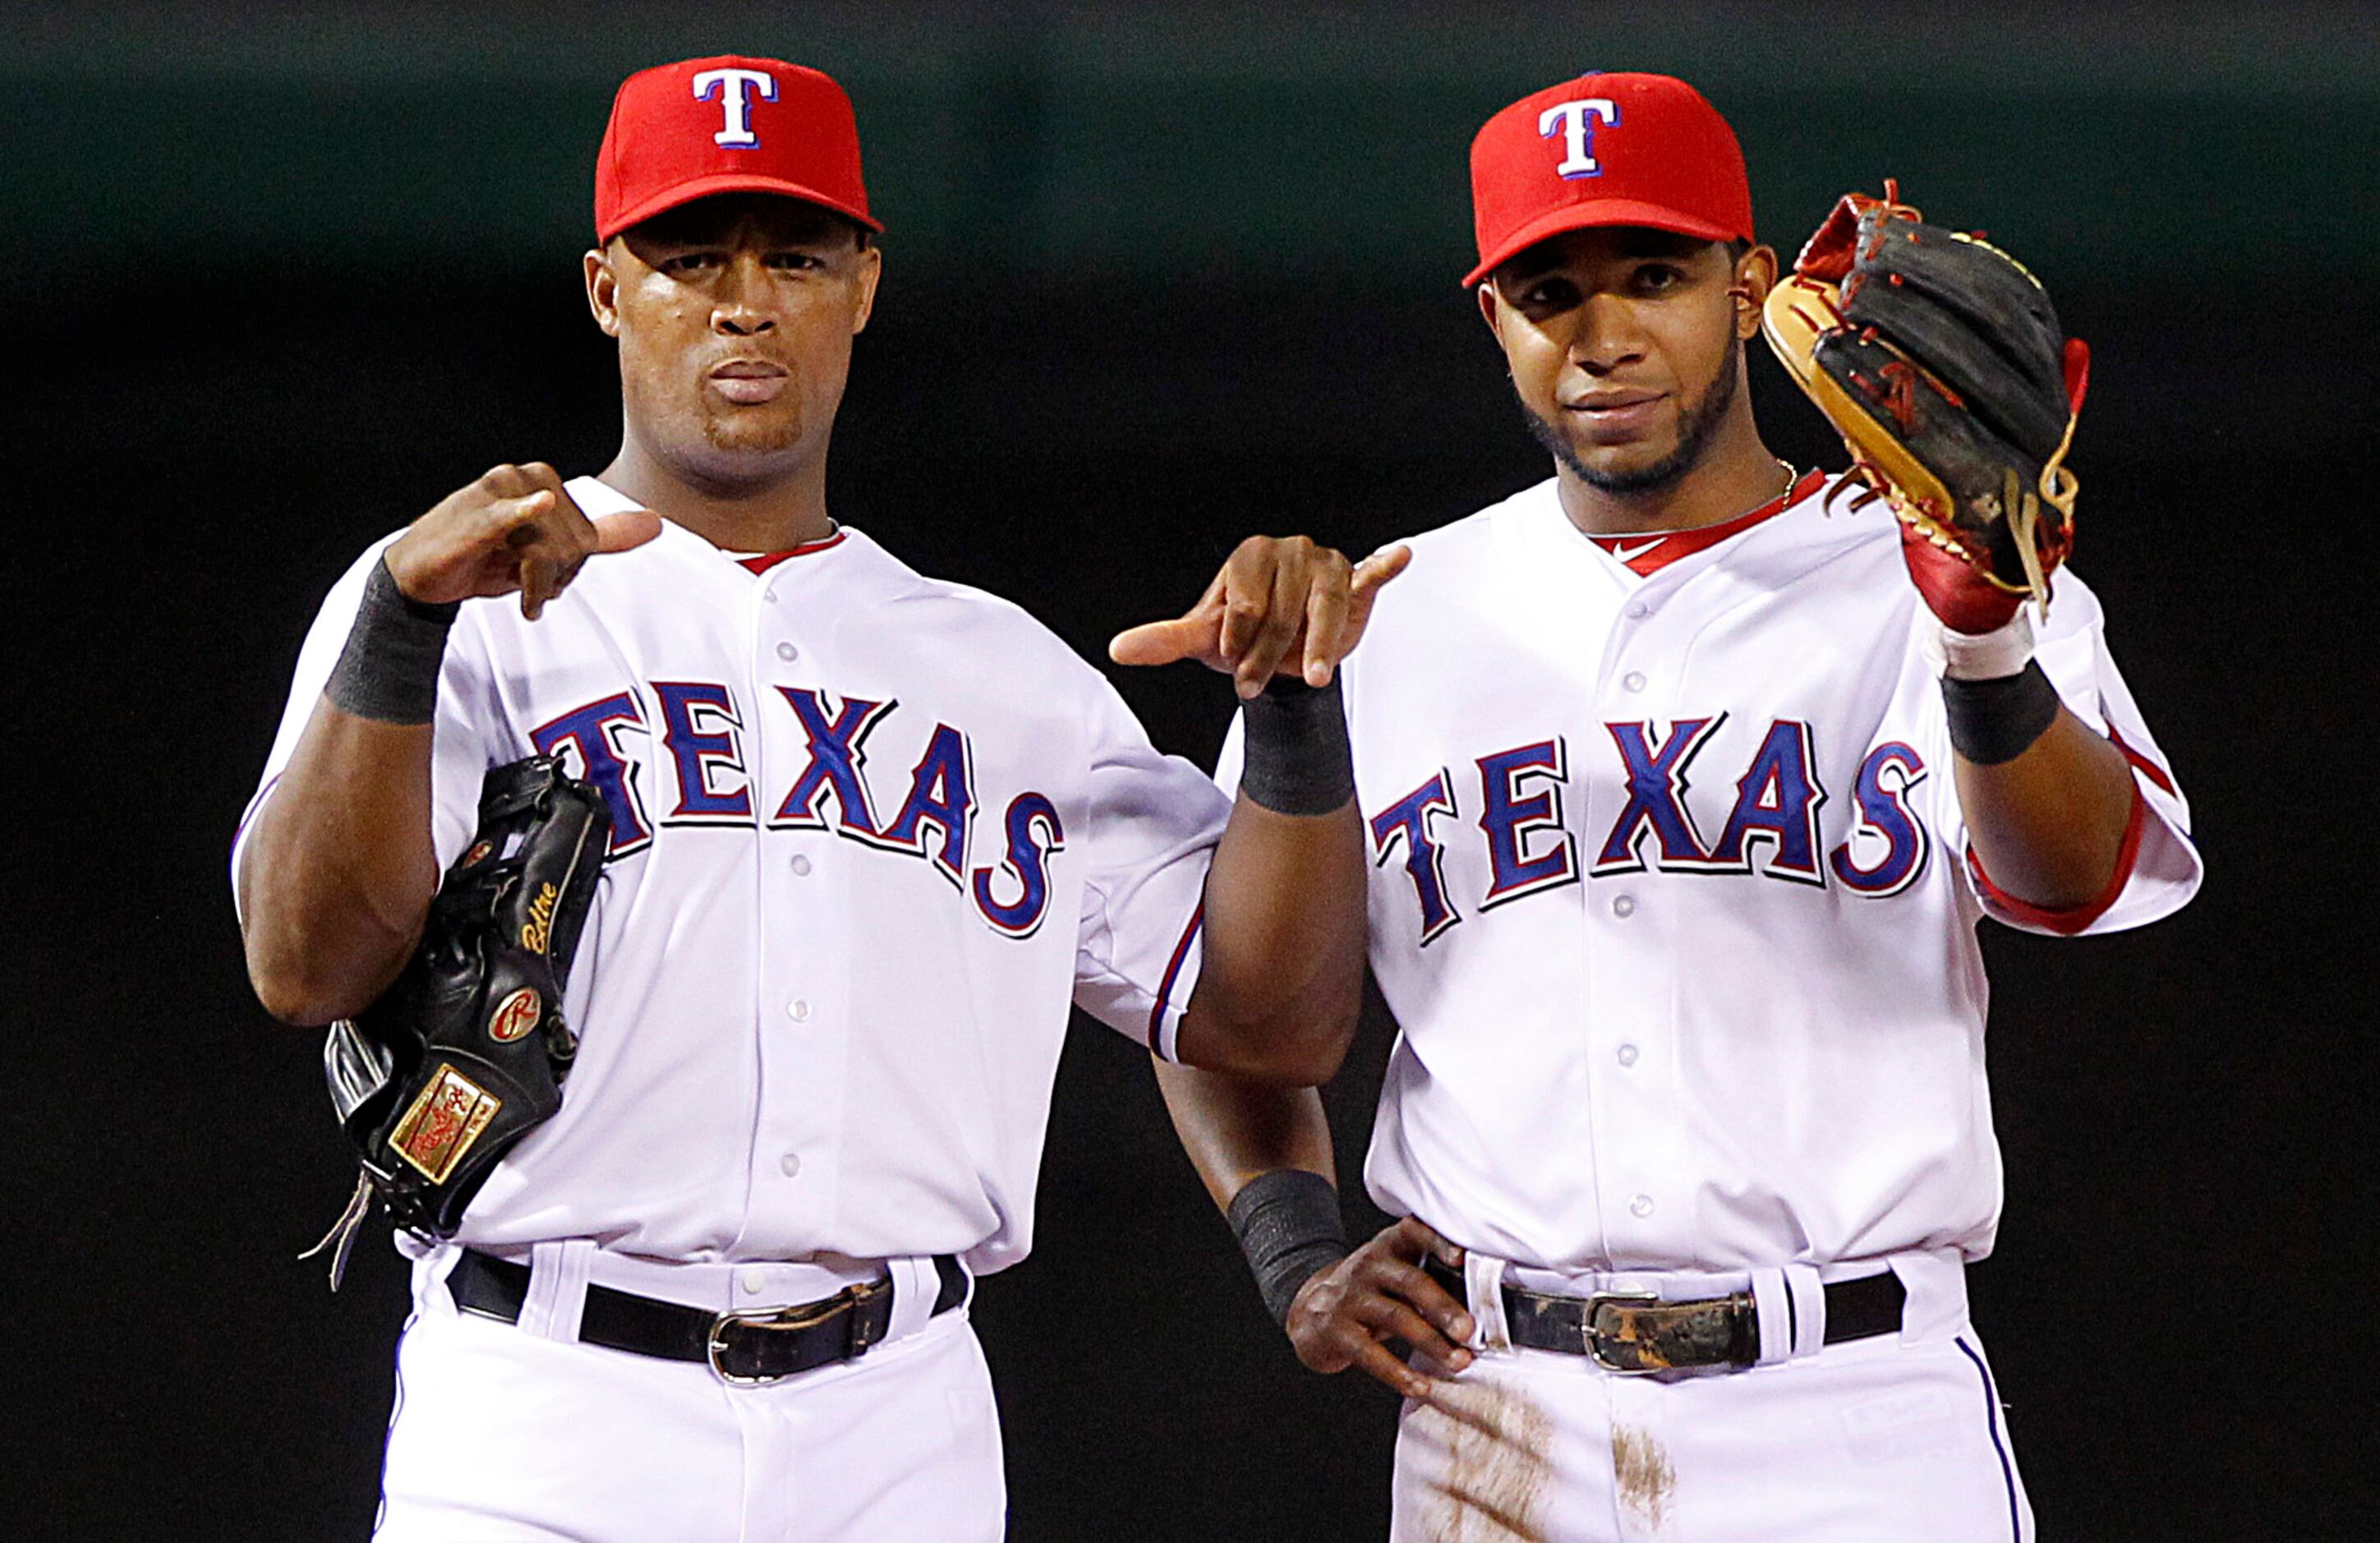 Adrian Beltre's No. 29 Texas Rangers jersey officially retired